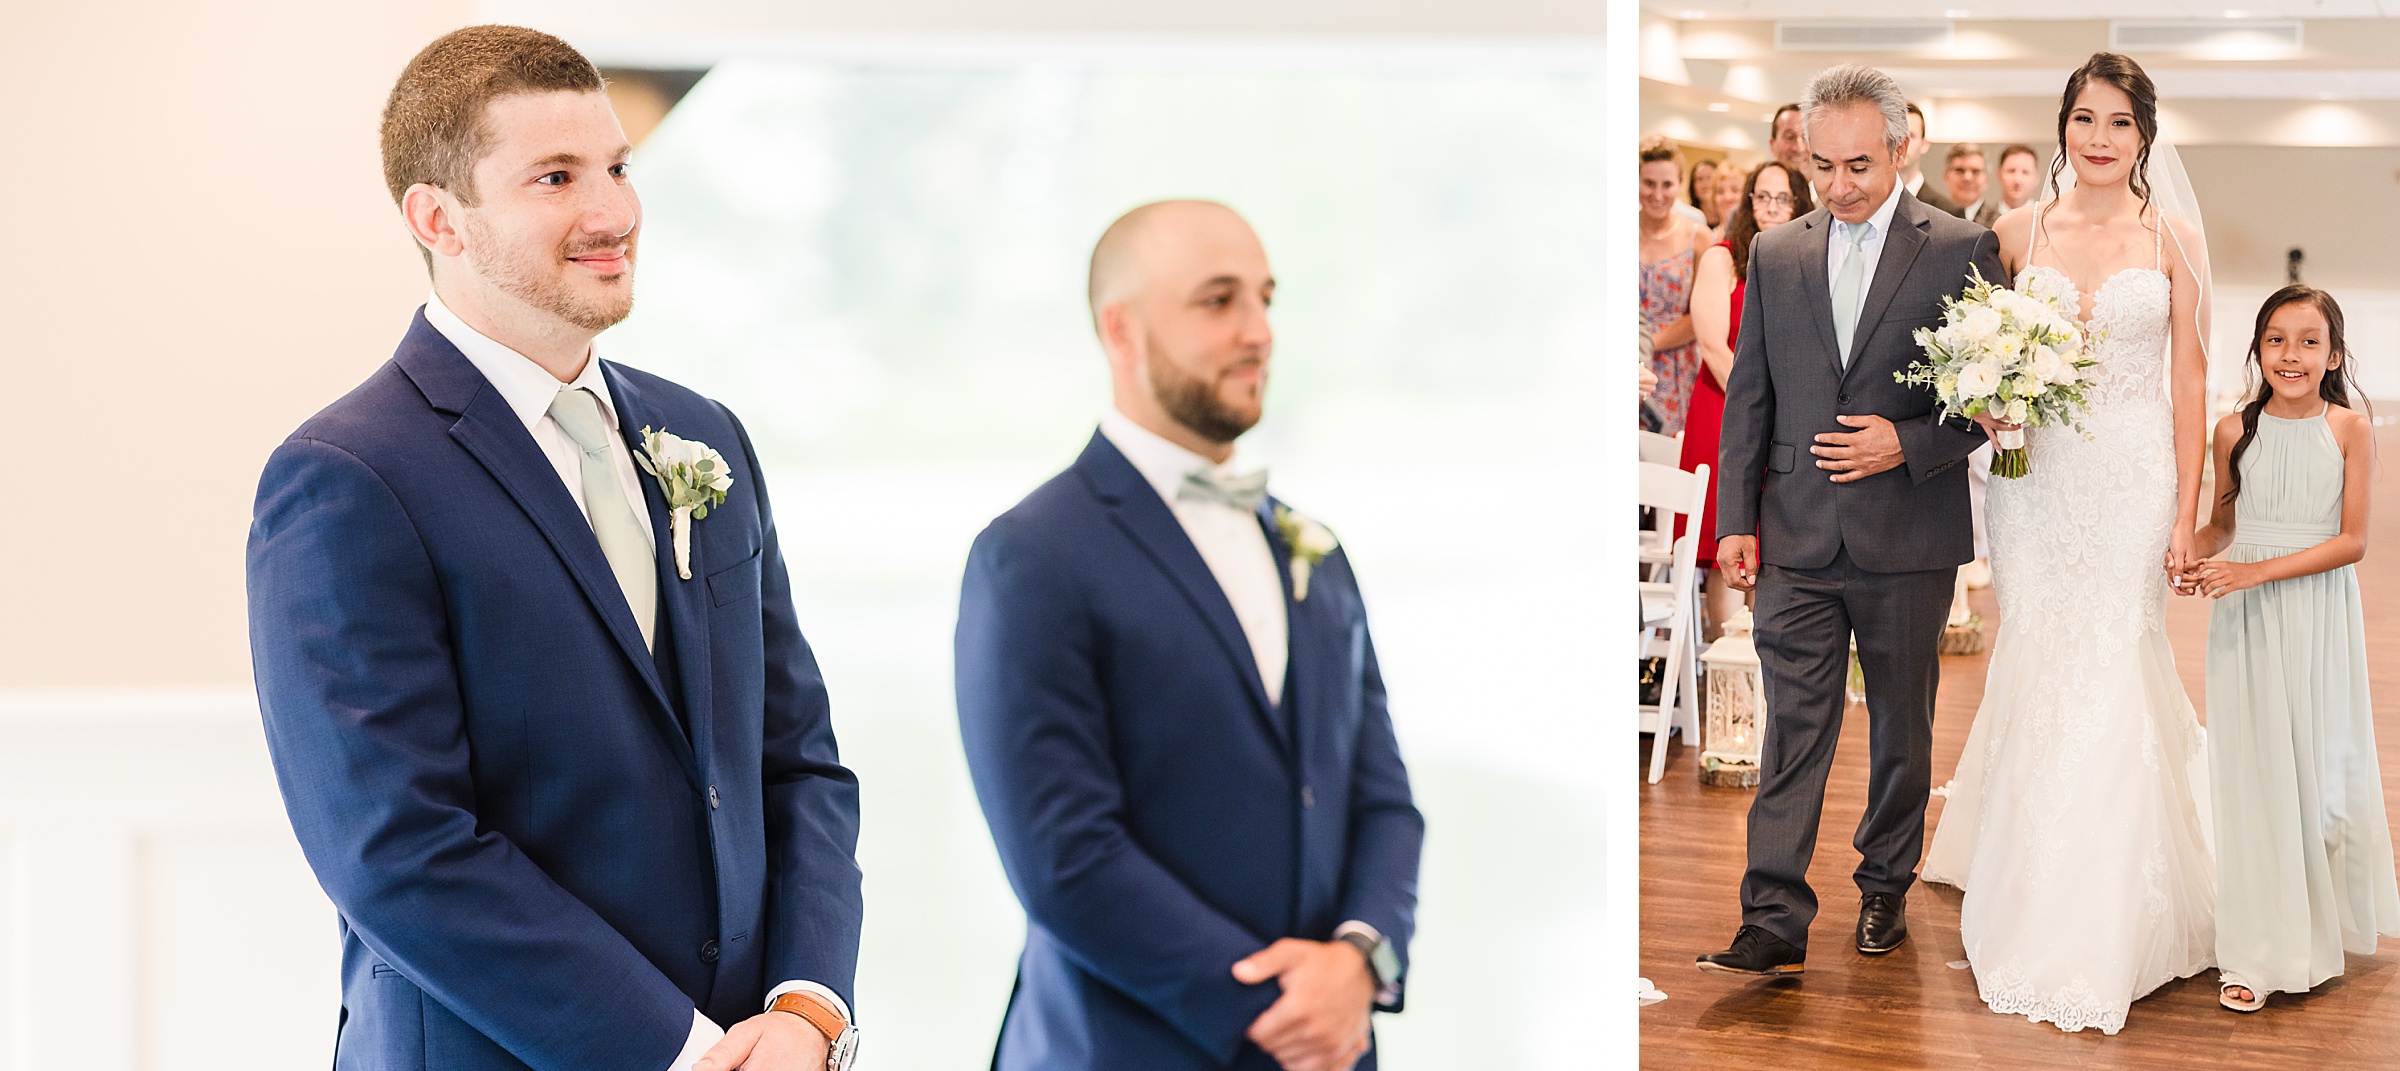 Groom watches the bride walk down the aisle during their wedding ceremony at the Fisherman's Inn in Elburn, Illinois.